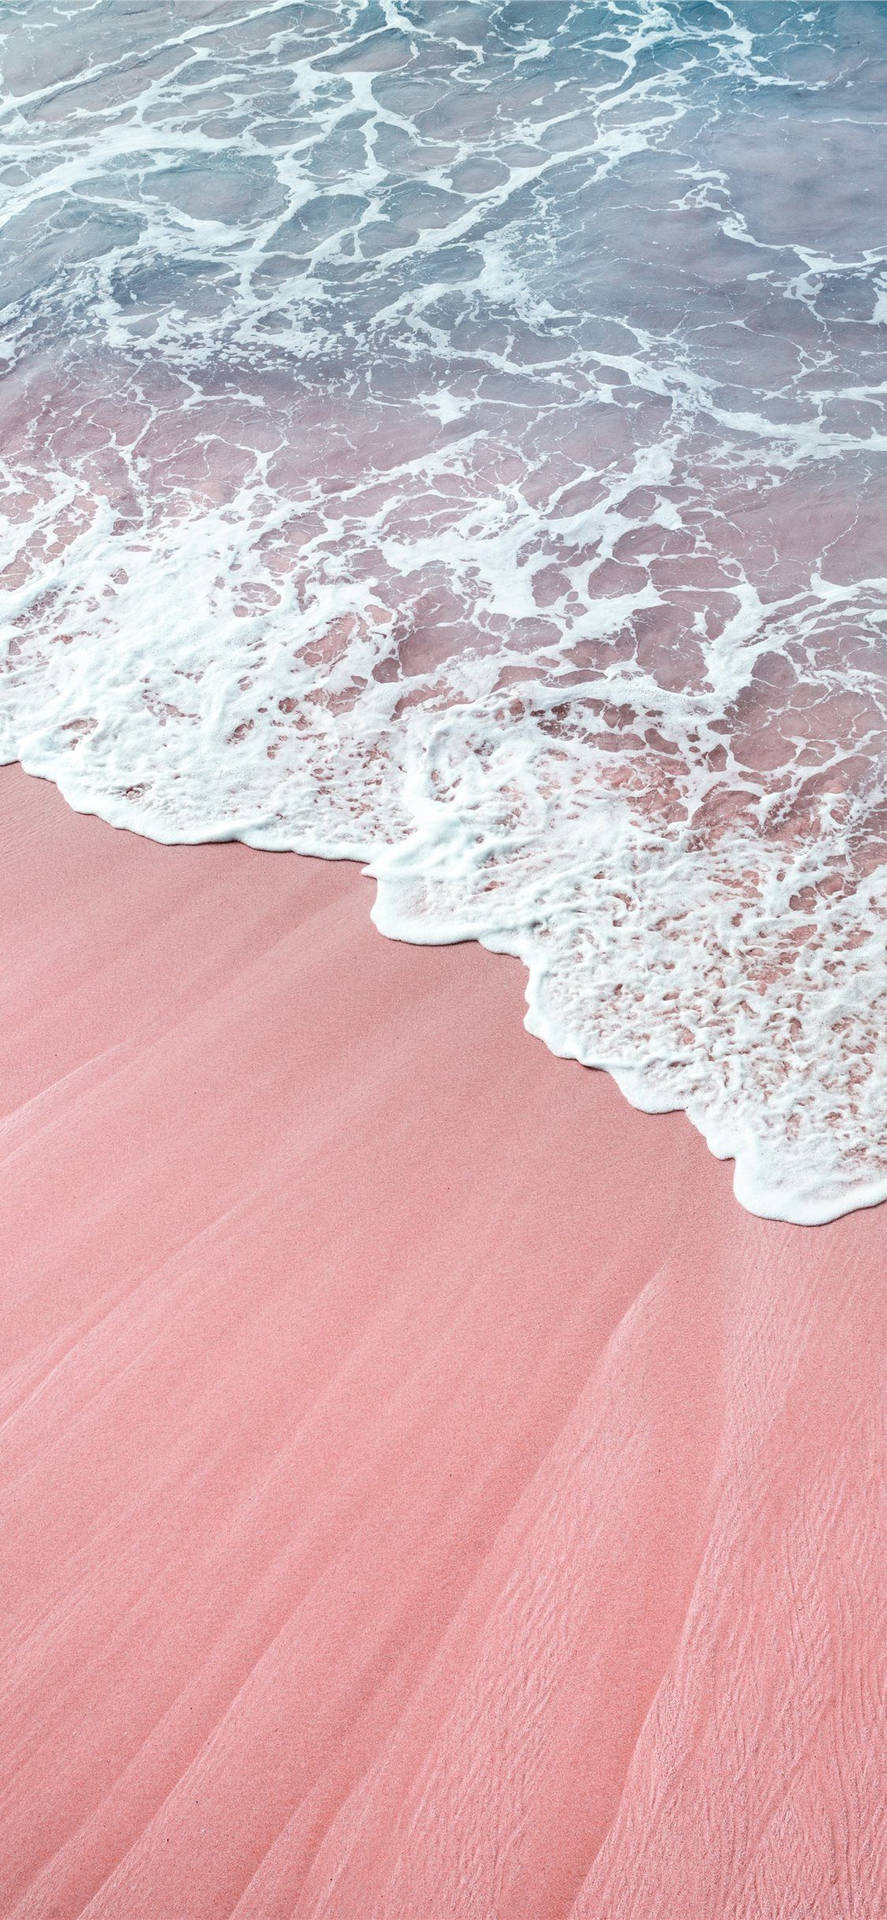 Rose Gold Ipad Beach With Crystal Water